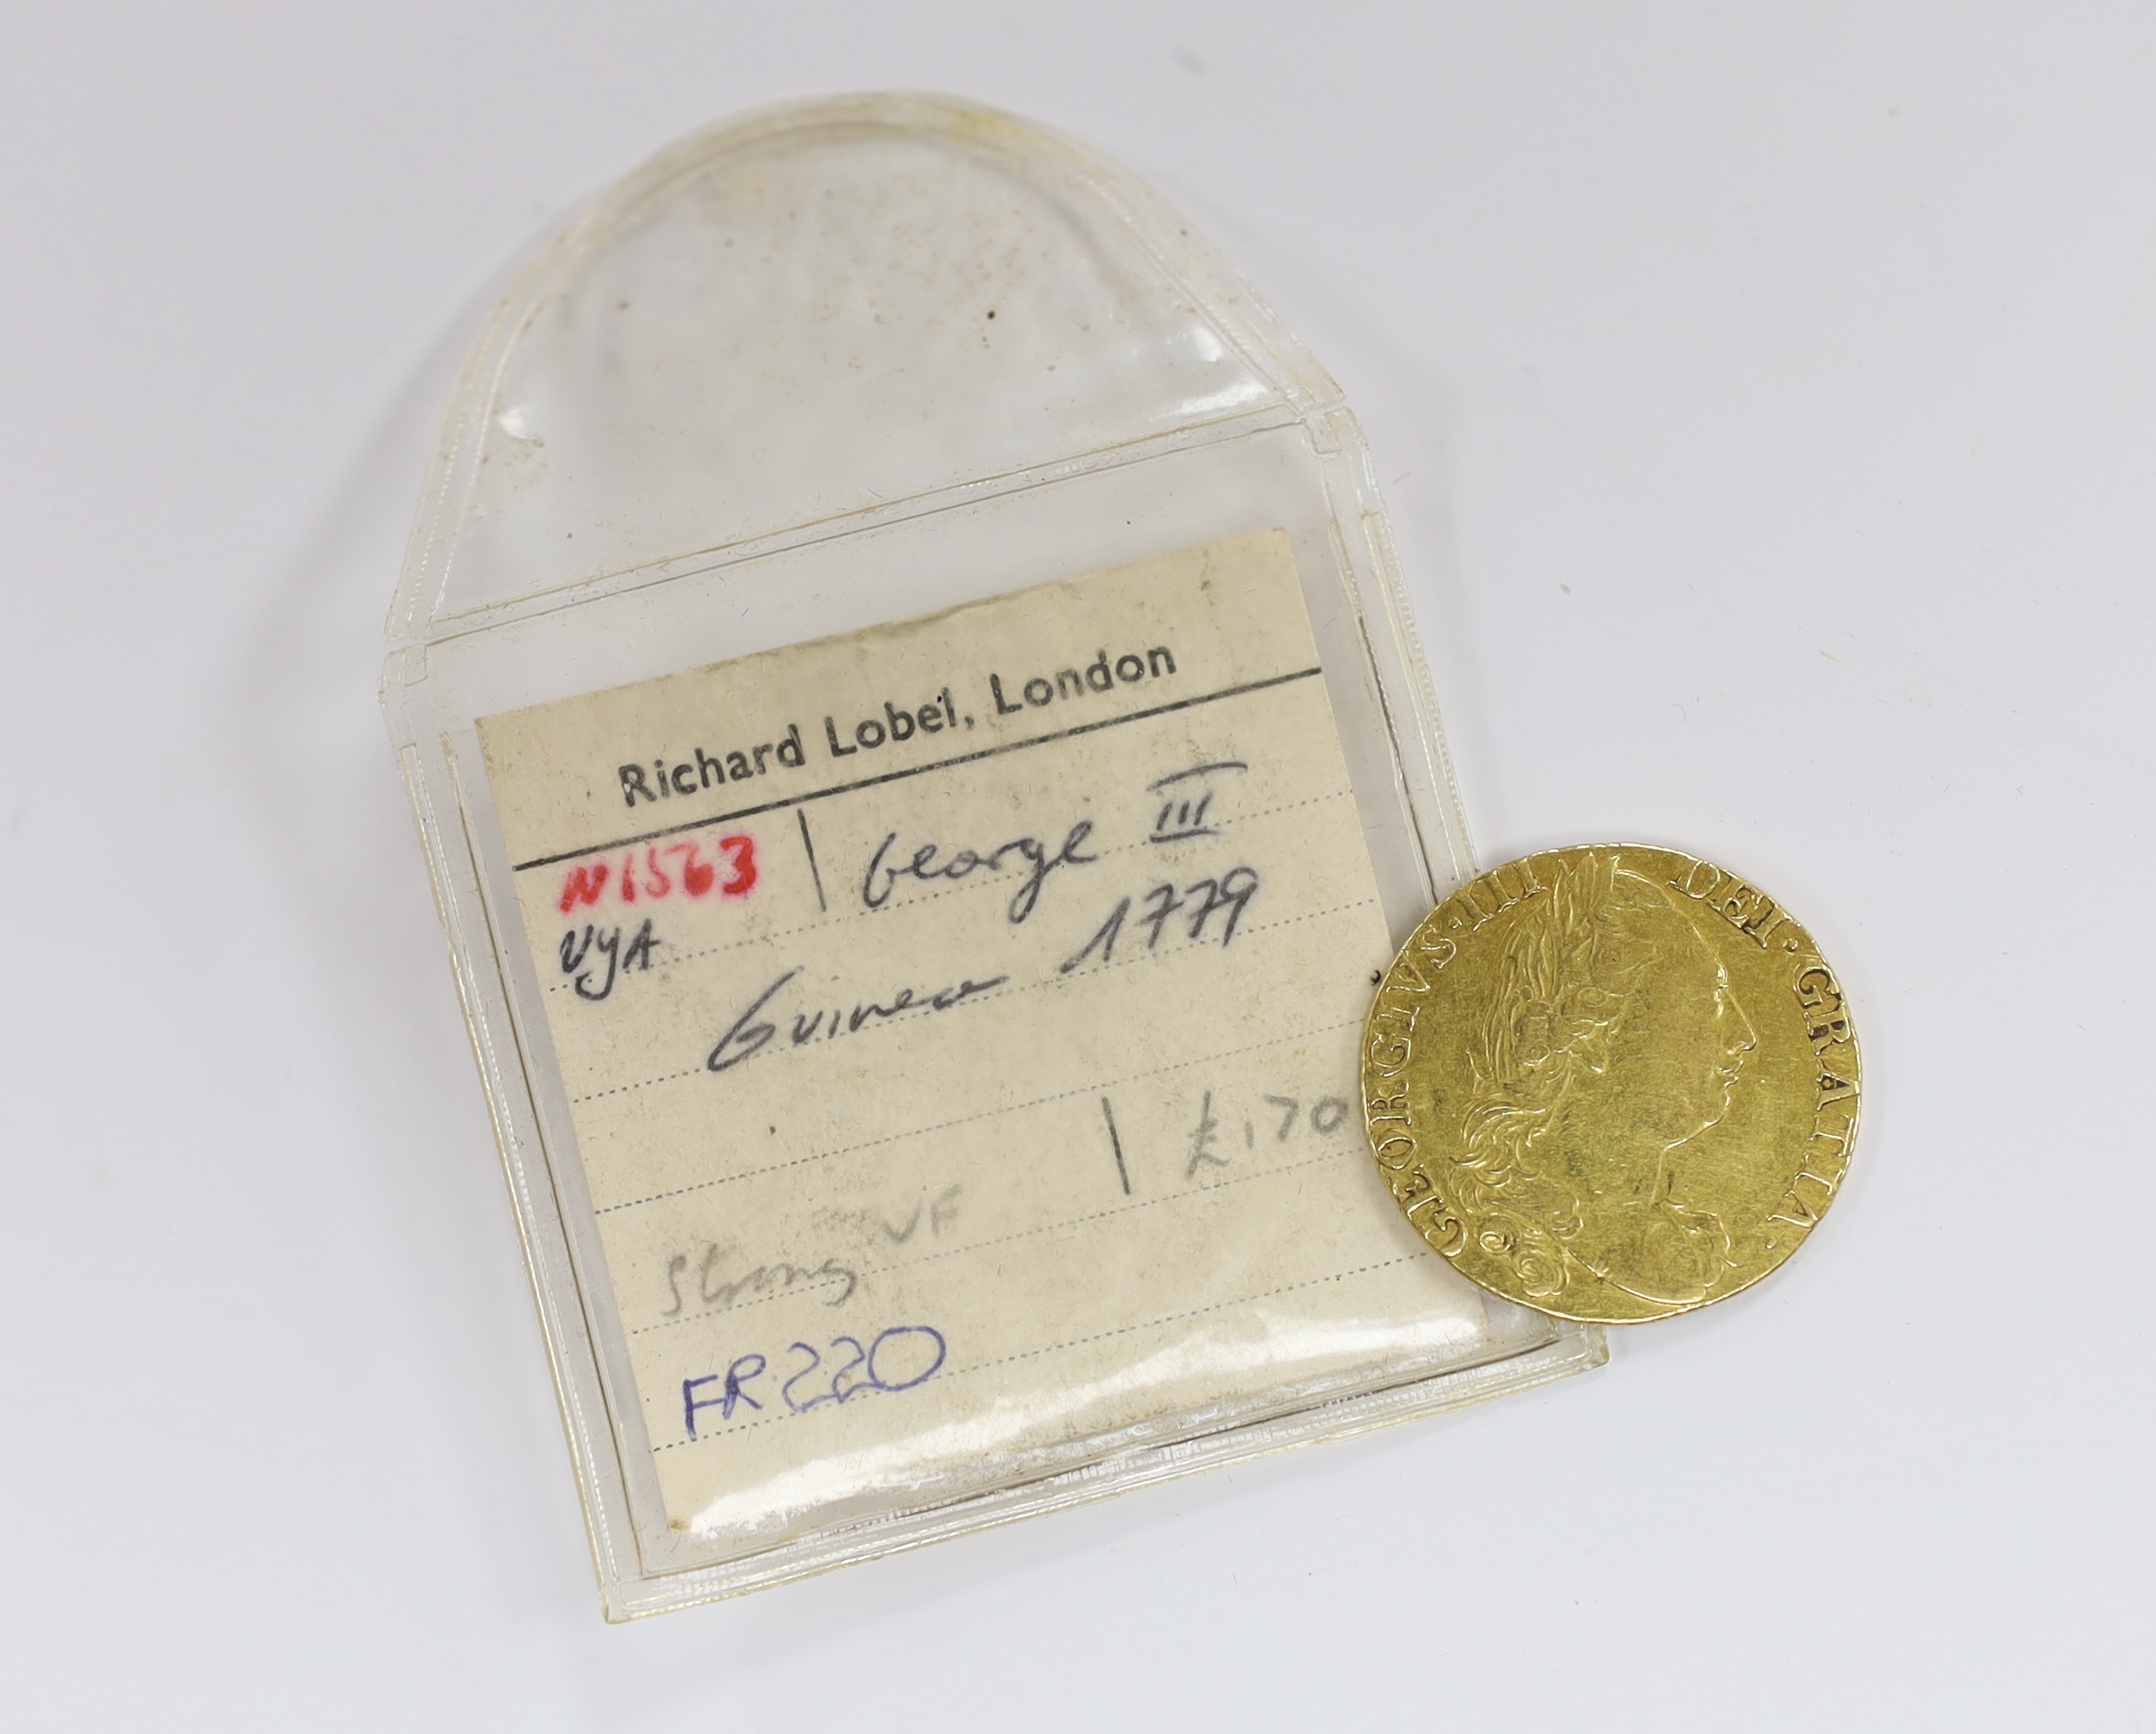 British gold coins - A George III gold guinea, 1779, fourth head, VF, (S3728), Provenance - bought from Richard Lobel and co, London, 7th March 1977 for £170.